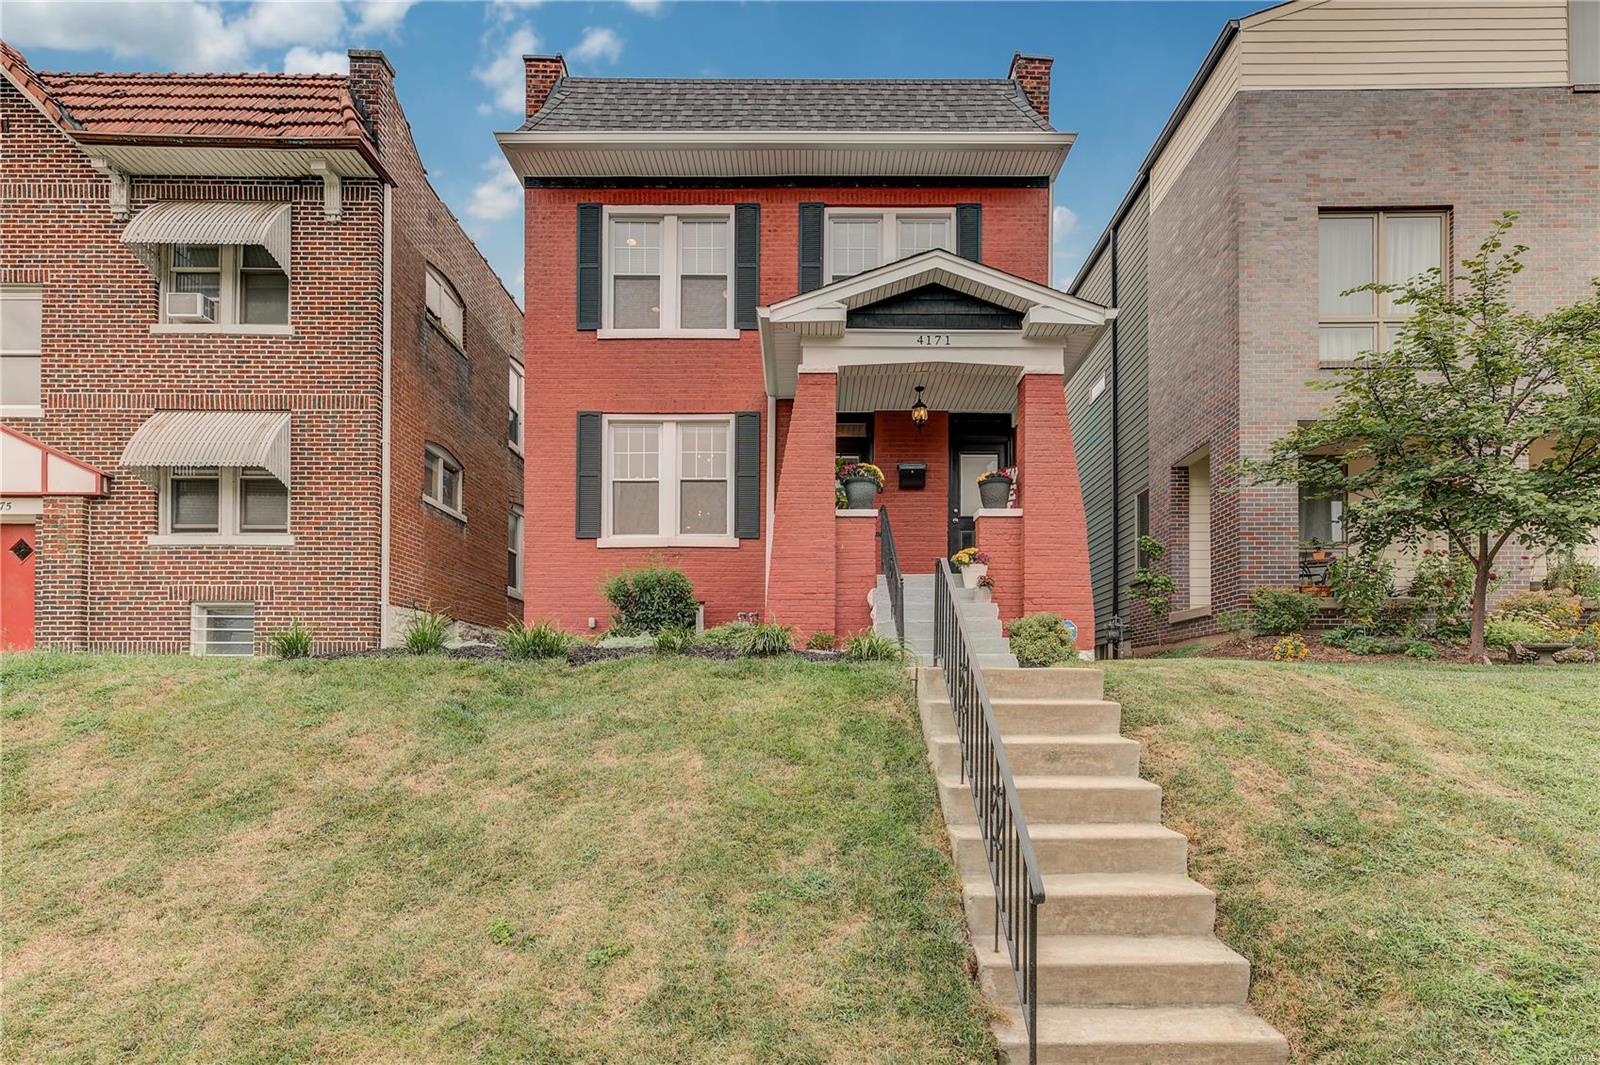 For Sale: 4171 Mcree Avenue, St Louis, MO 63110, Botanical Heights | 3 Beds / 3 Full Baths | $355000